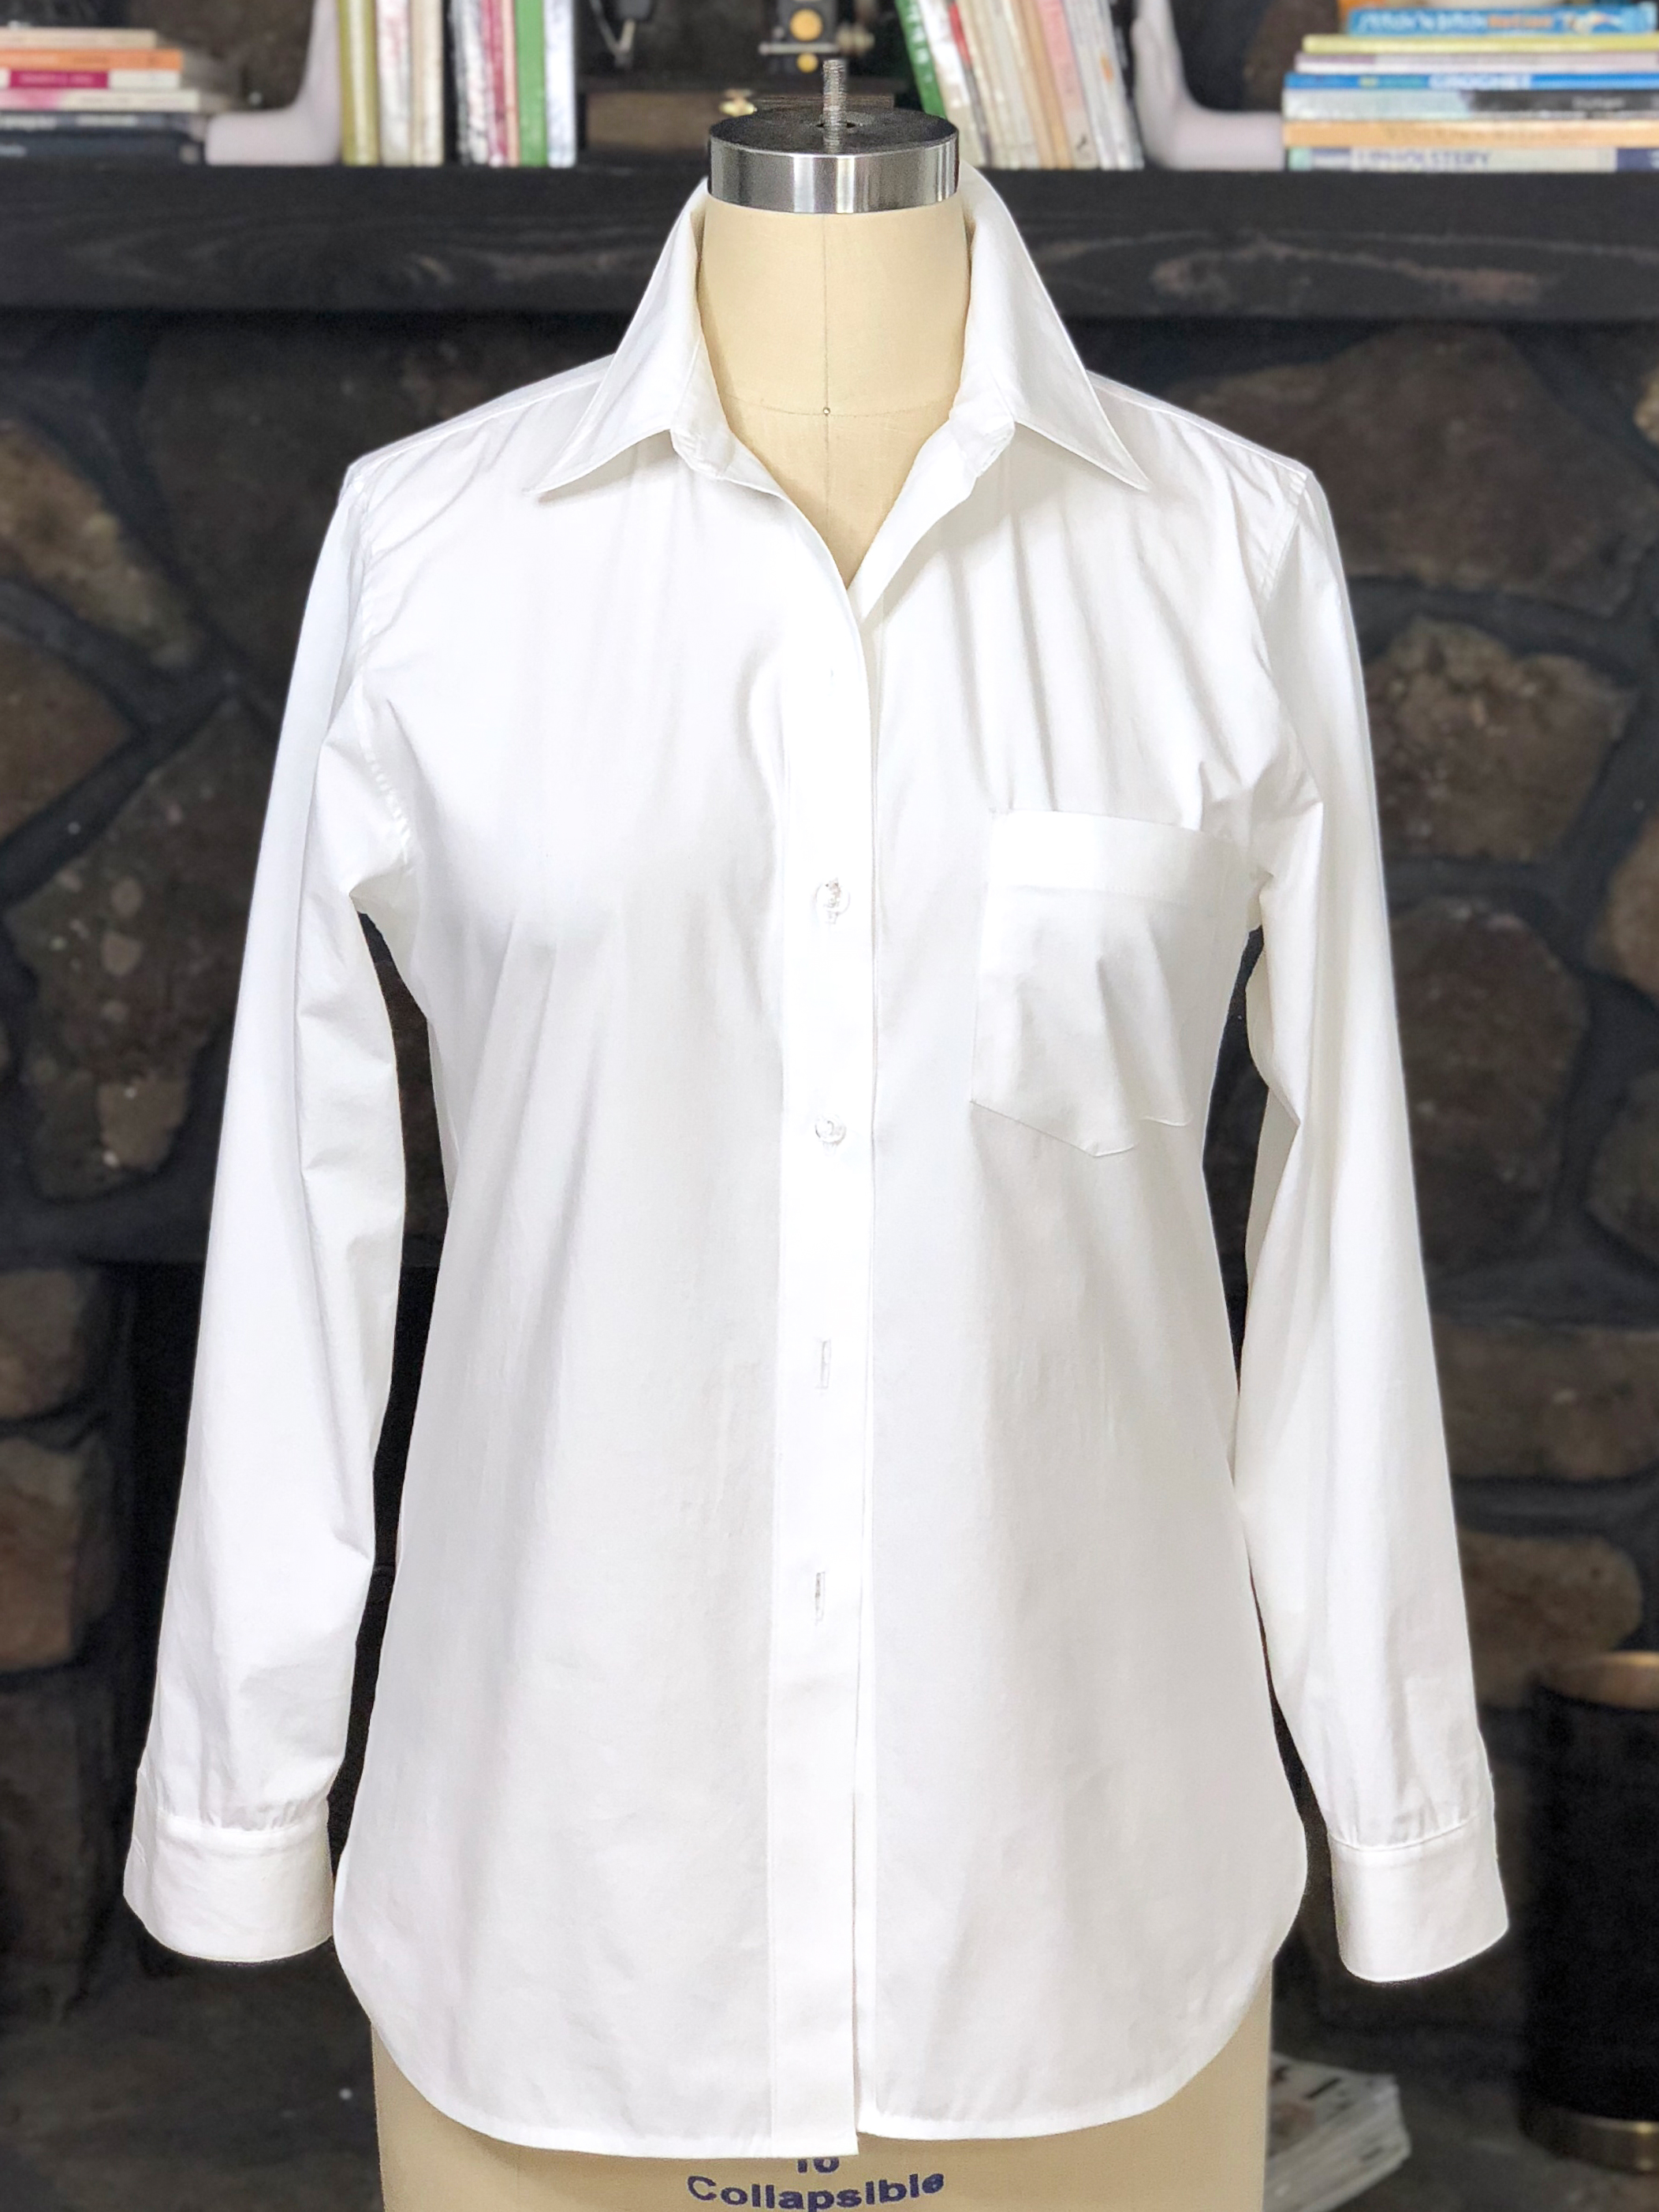 Shirtmaking: Button Placement & Buttonhole Tips